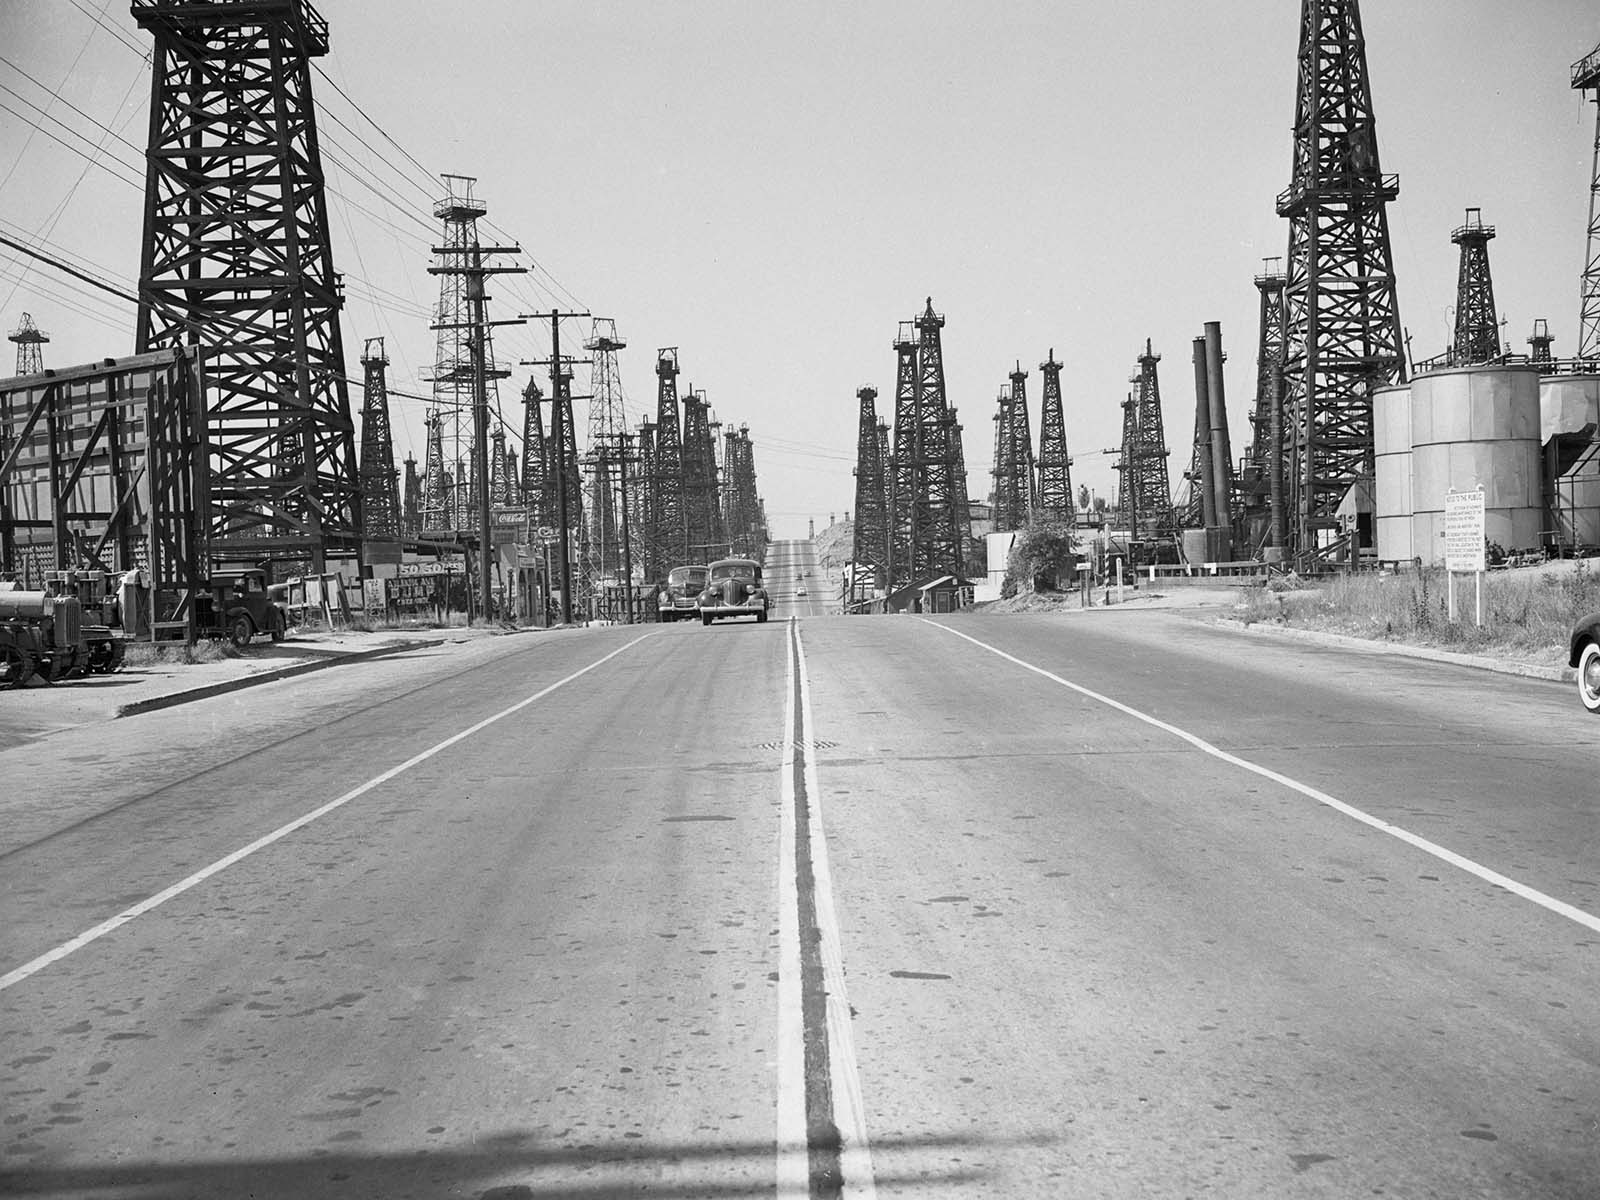 Atlantic Avenue and Patterson Street, Long Beach, are lined with oil derricks in 1940